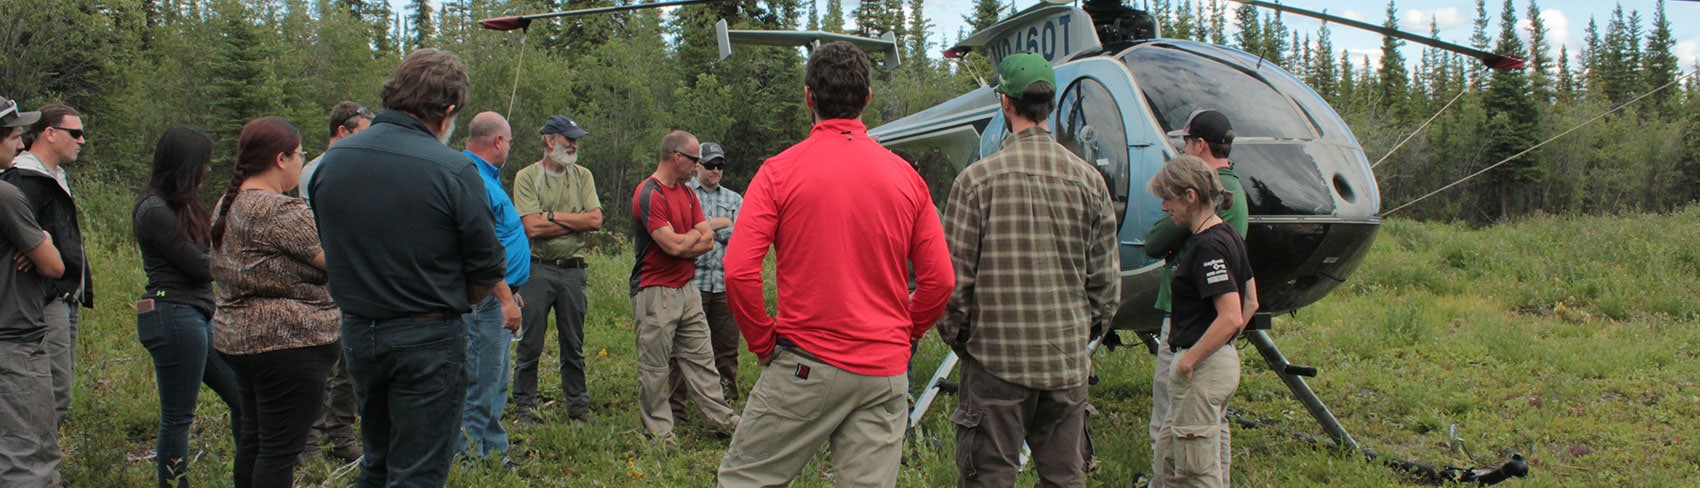 Land team gathers around a helicopter.